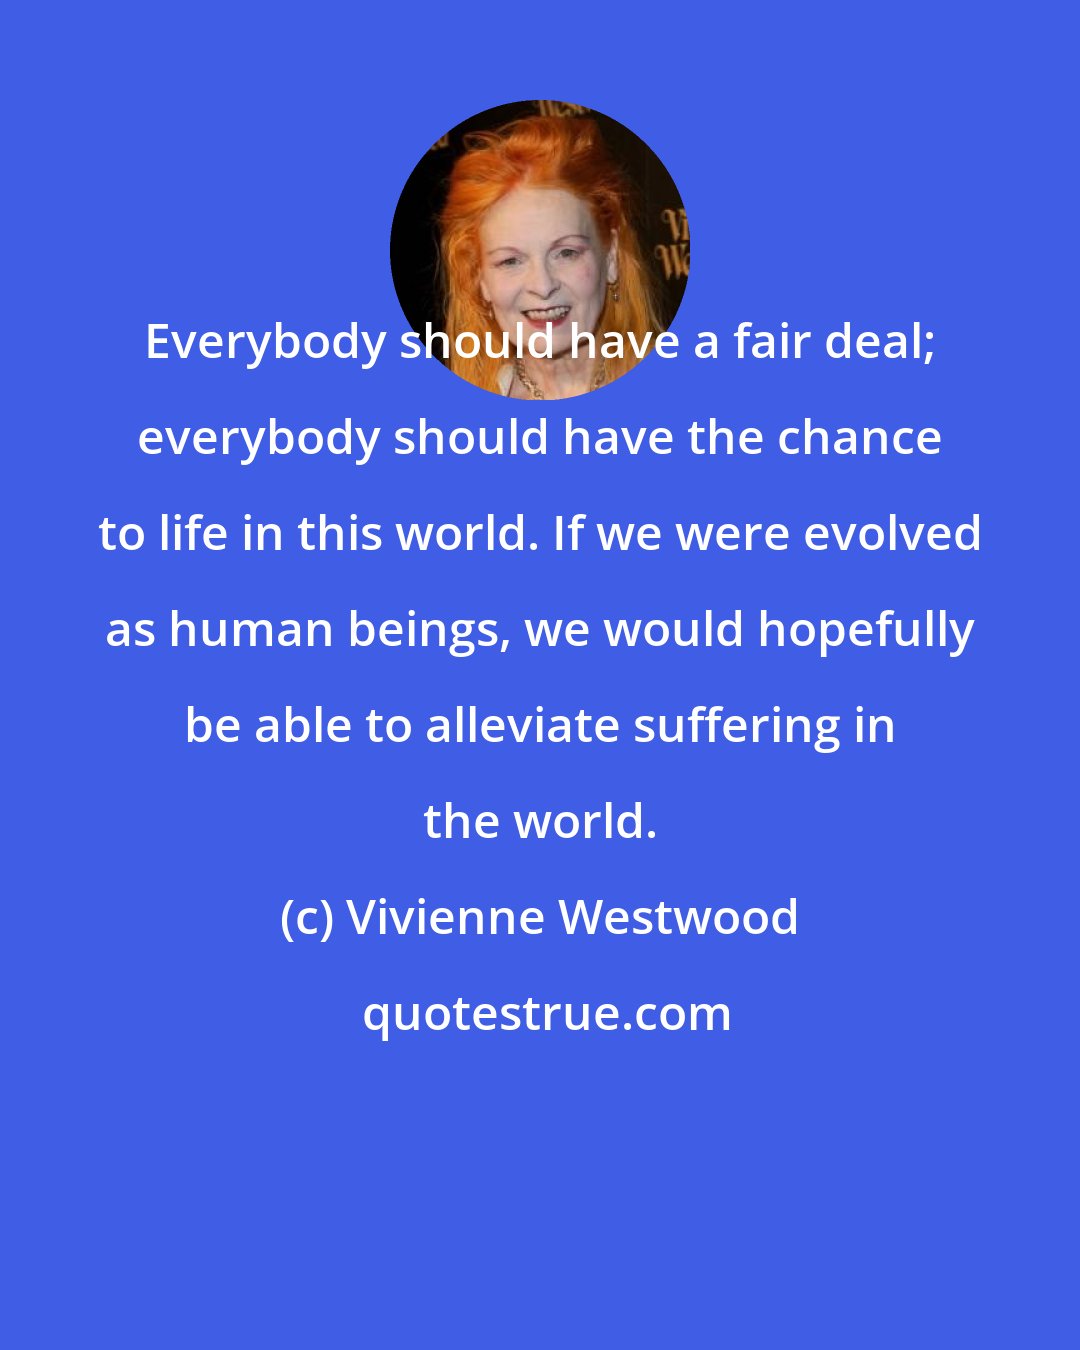 Vivienne Westwood: Everybody should have a fair deal; everybody should have the chance to life in this world. If we were evolved as human beings, we would hopefully be able to alleviate suffering in the world.